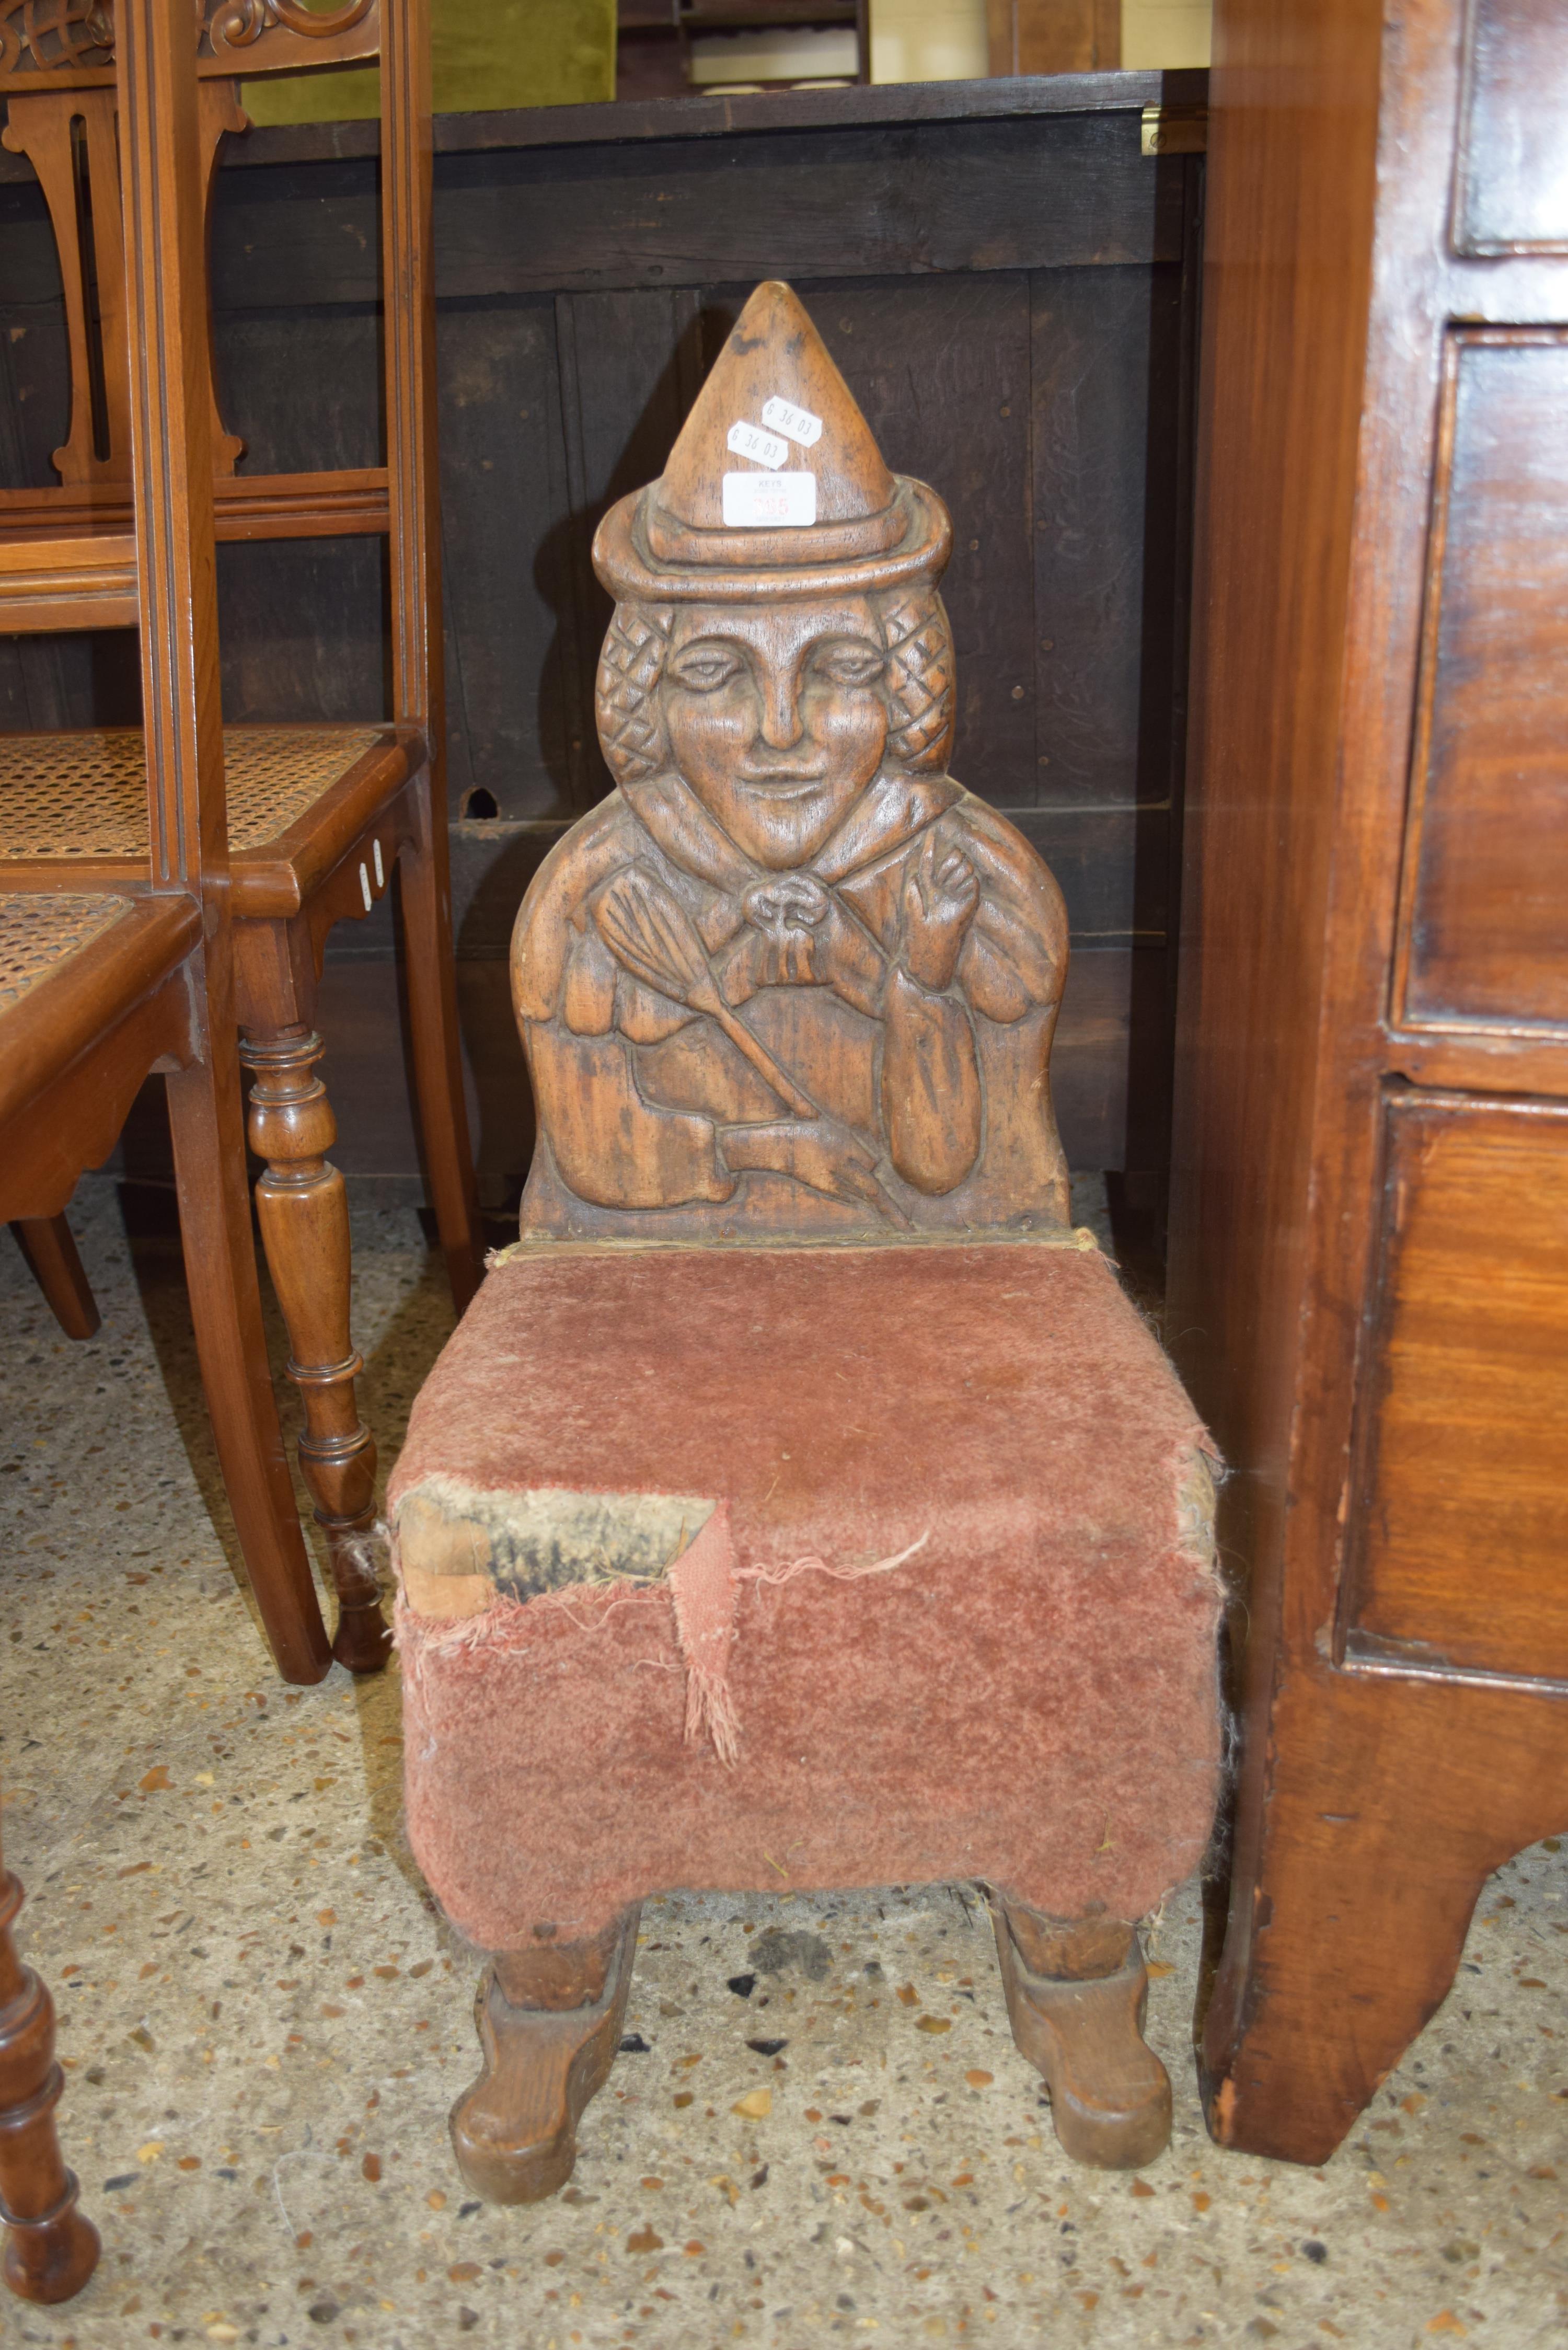 SMALL SIDE CHAIR WITH CARVED FIGURE FORM BACK, MARKED TO REVERSE "PENAR DUKKERIN", 67CM HIGH